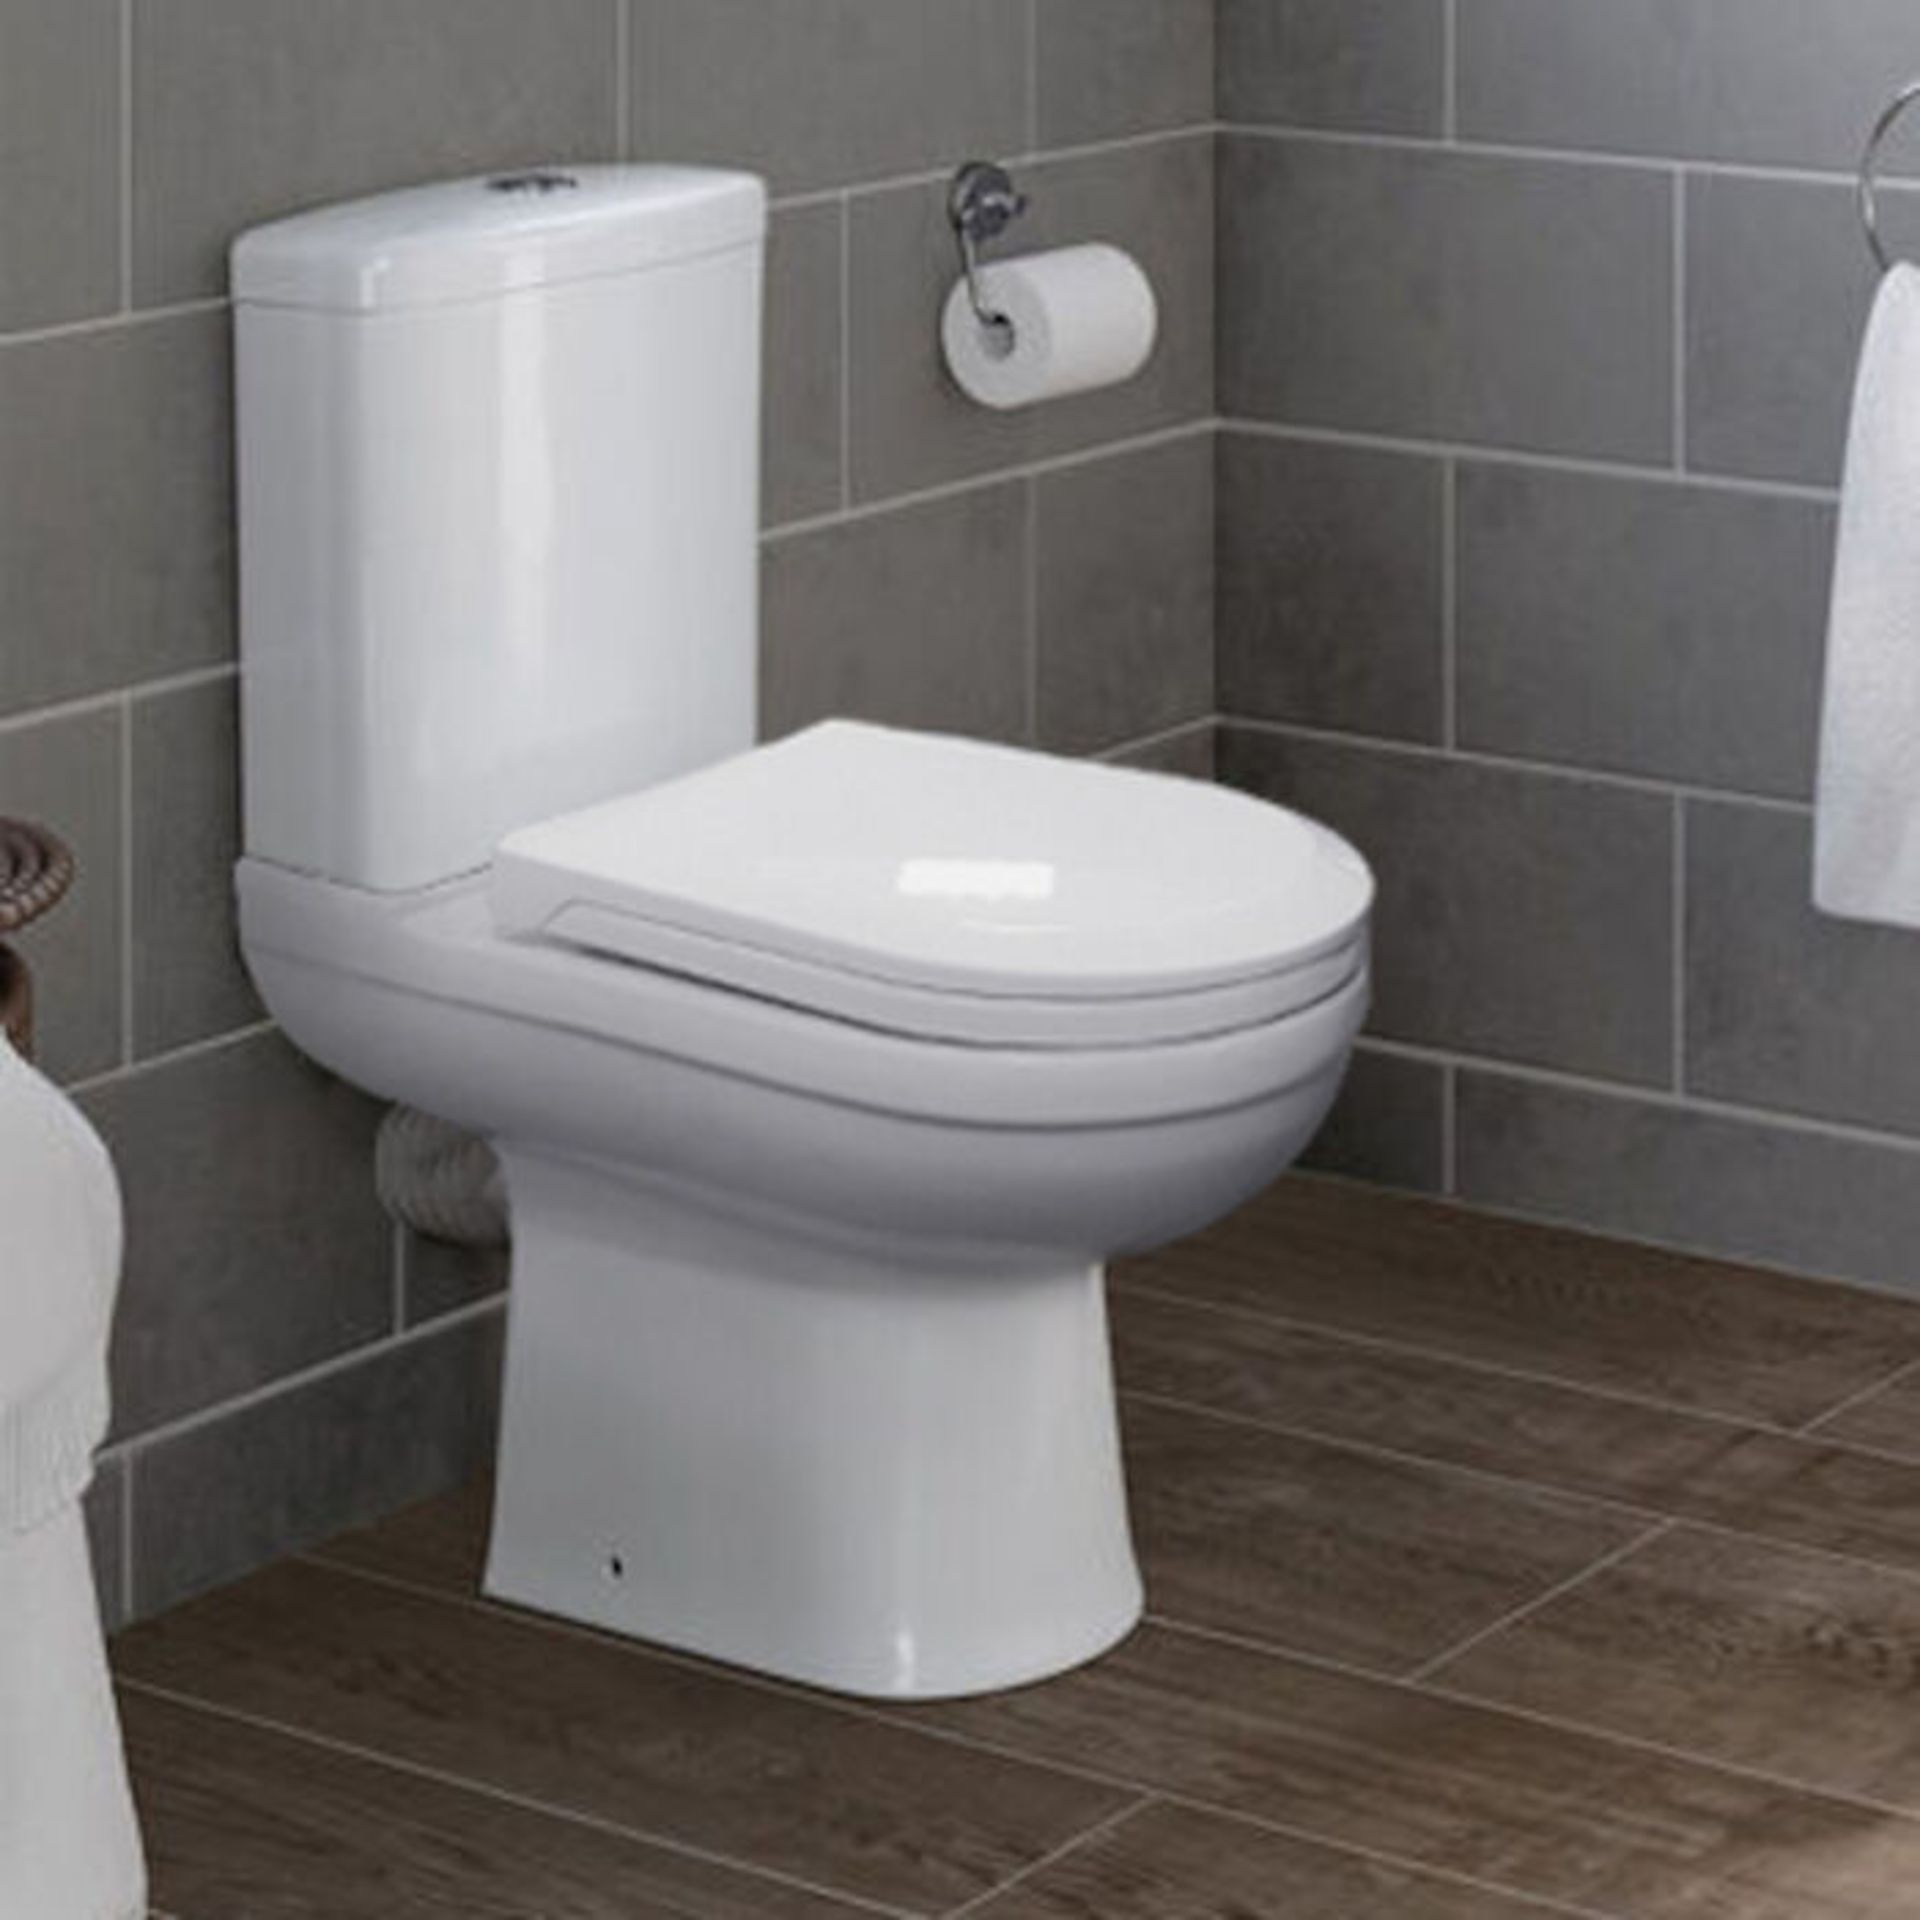 Sabrosa II Close Coupled Toilet & Cistern with Soft Close Seat. Made from White Vitreous China ...